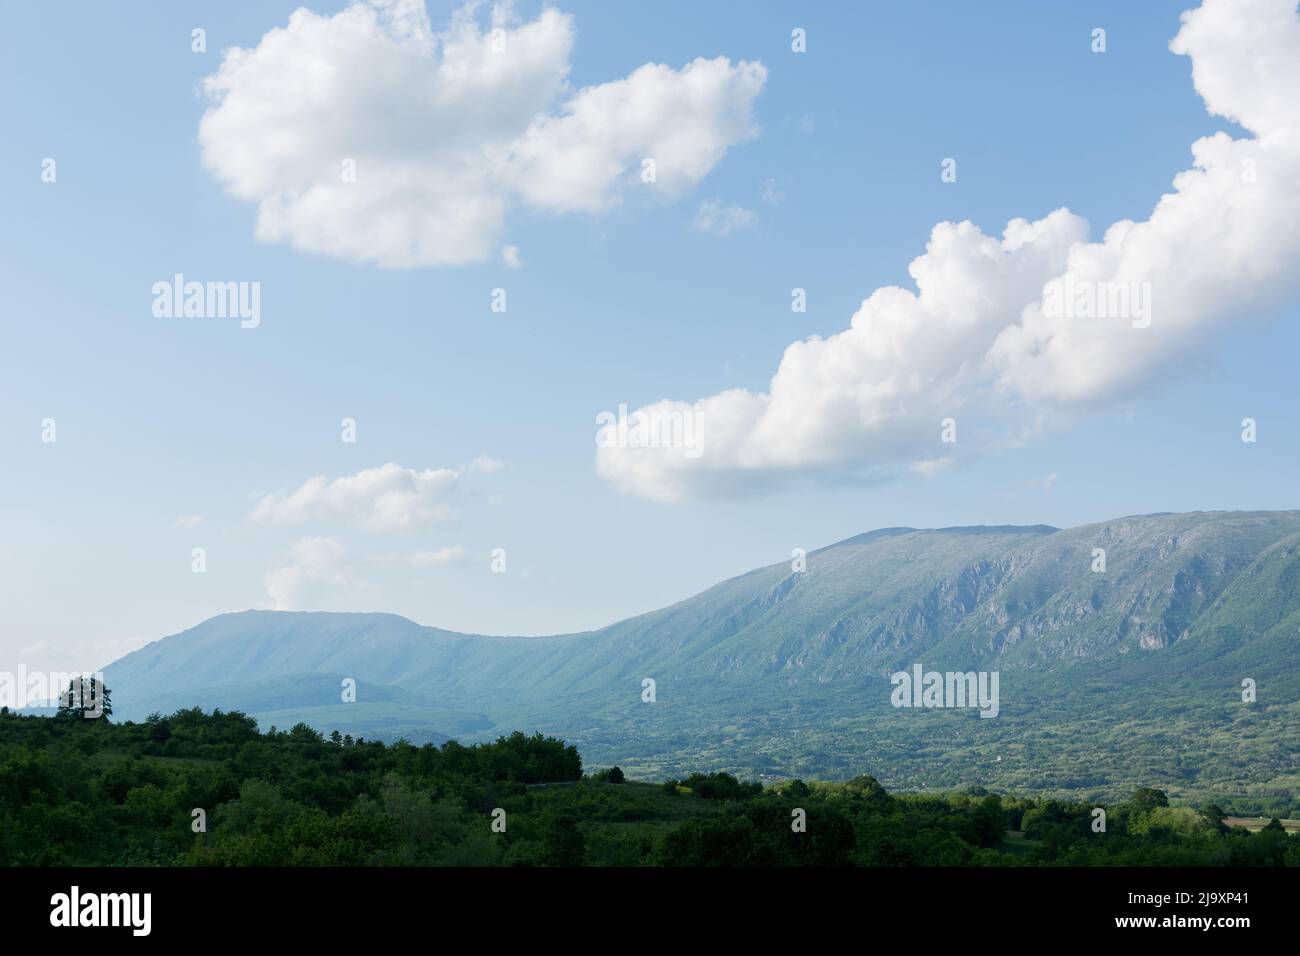 Beautiful panorama view of Suva Planina, a chain of mountains and hills in Serbia, with forests, hills and agricultural fields on a spring sunny day Stock Photo